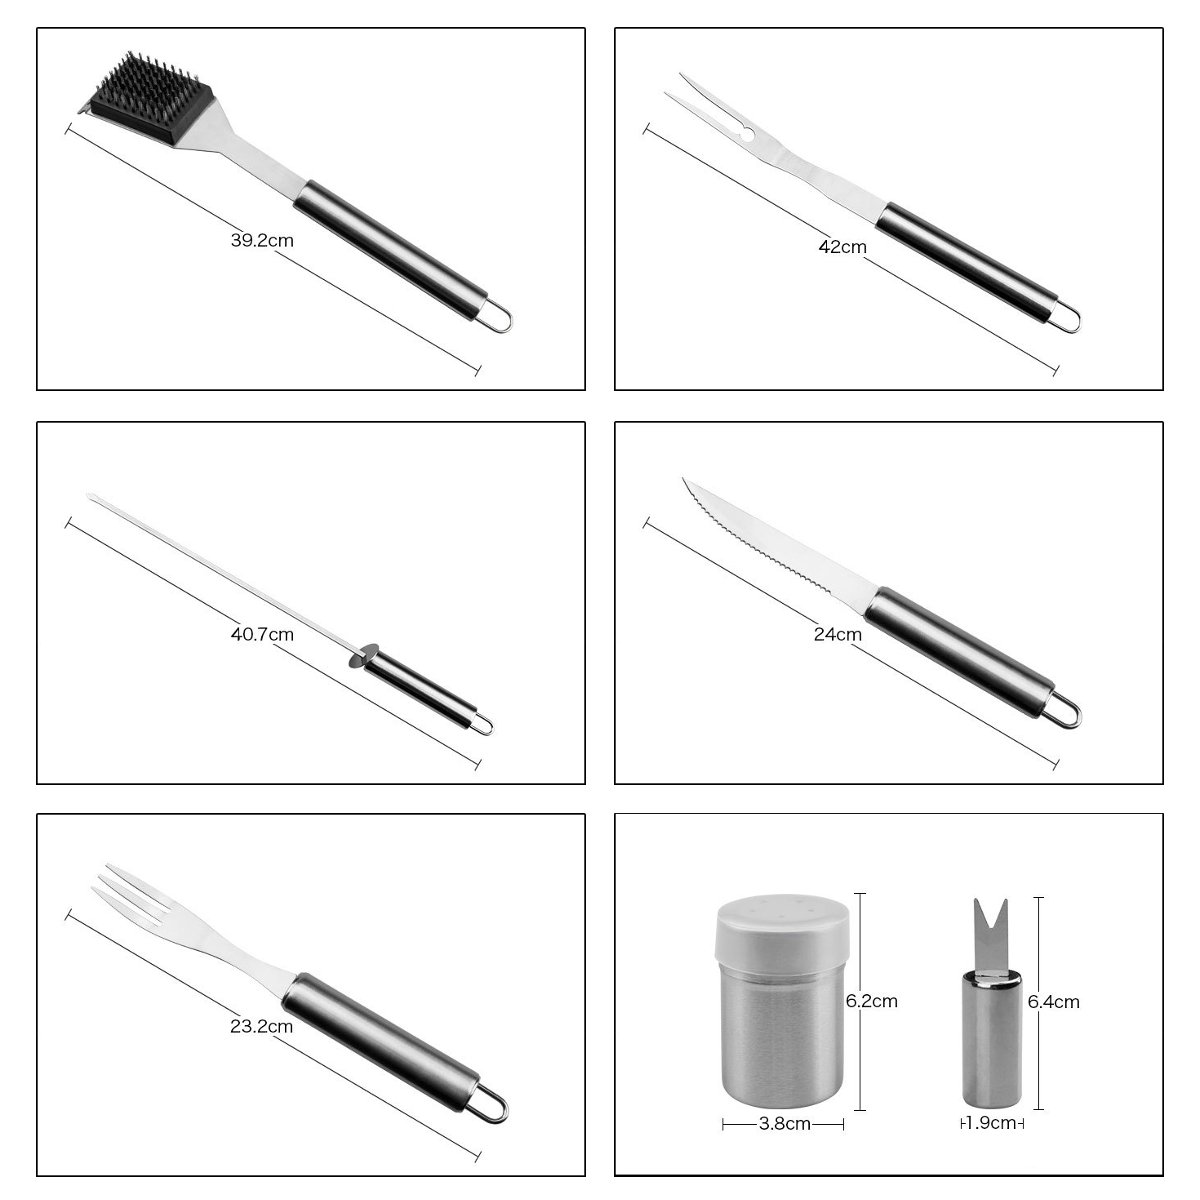 5Pcs26Pcs-Barbecue-Tool-Set-Stainless-Steel-Stick-Fork-Brush-Spatula-BBQ-Accessories-1434366